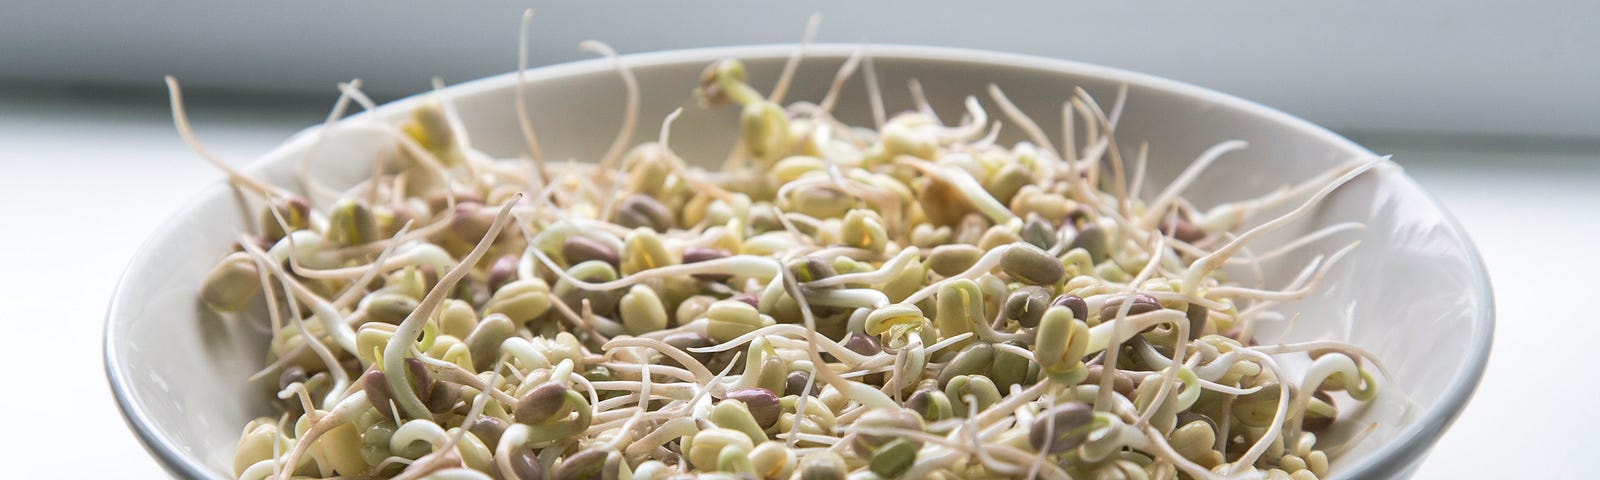 A bowl of sprouts sits on a white surfacea